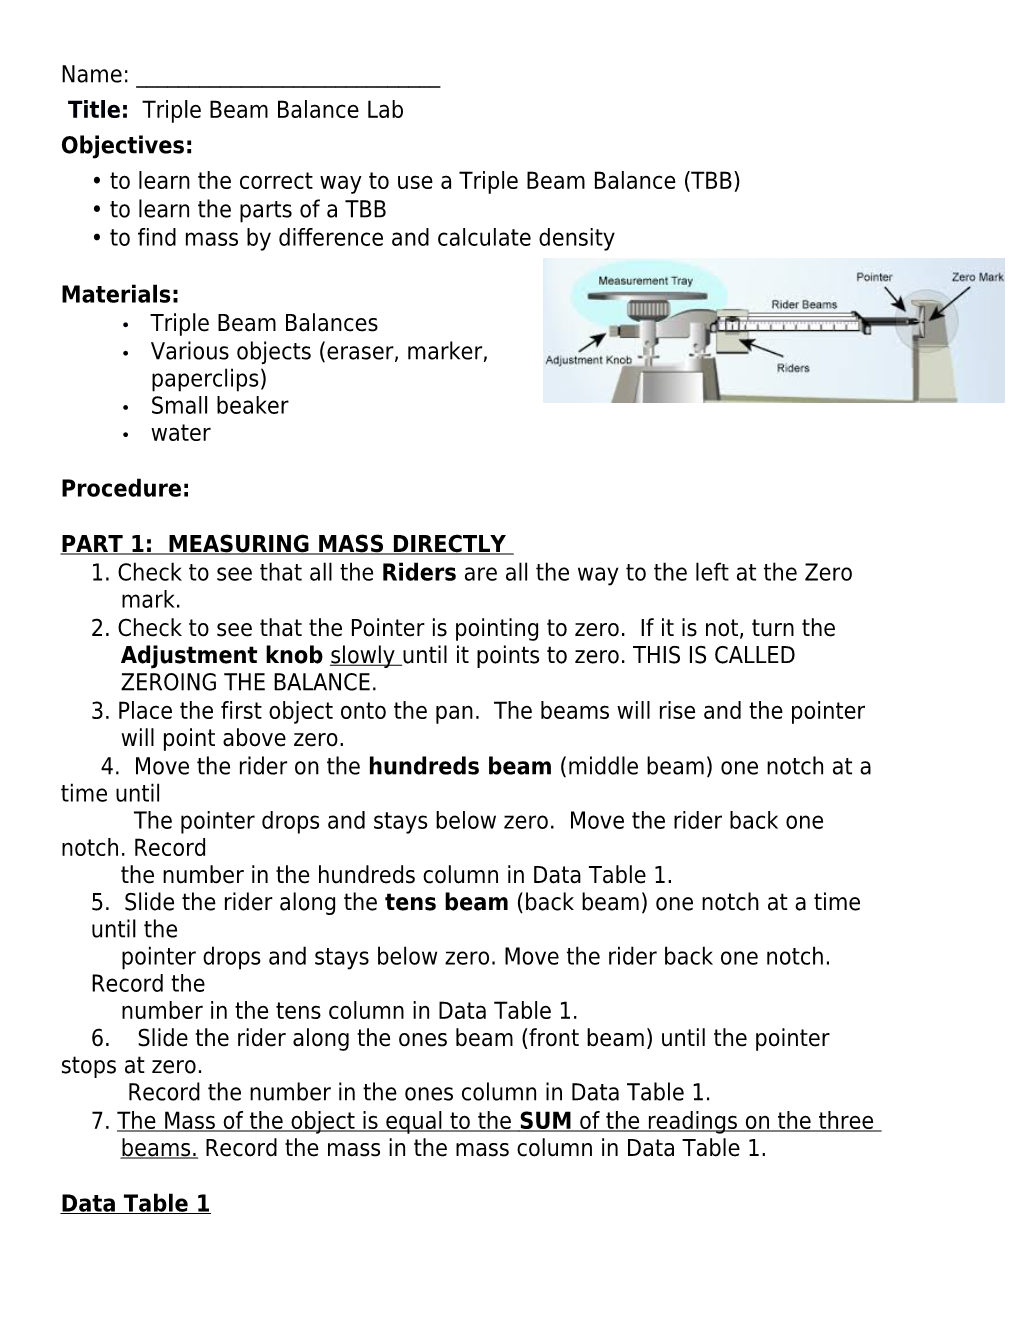 To Learn the Correct Way to Use a Triple Beam Balance (TBB)